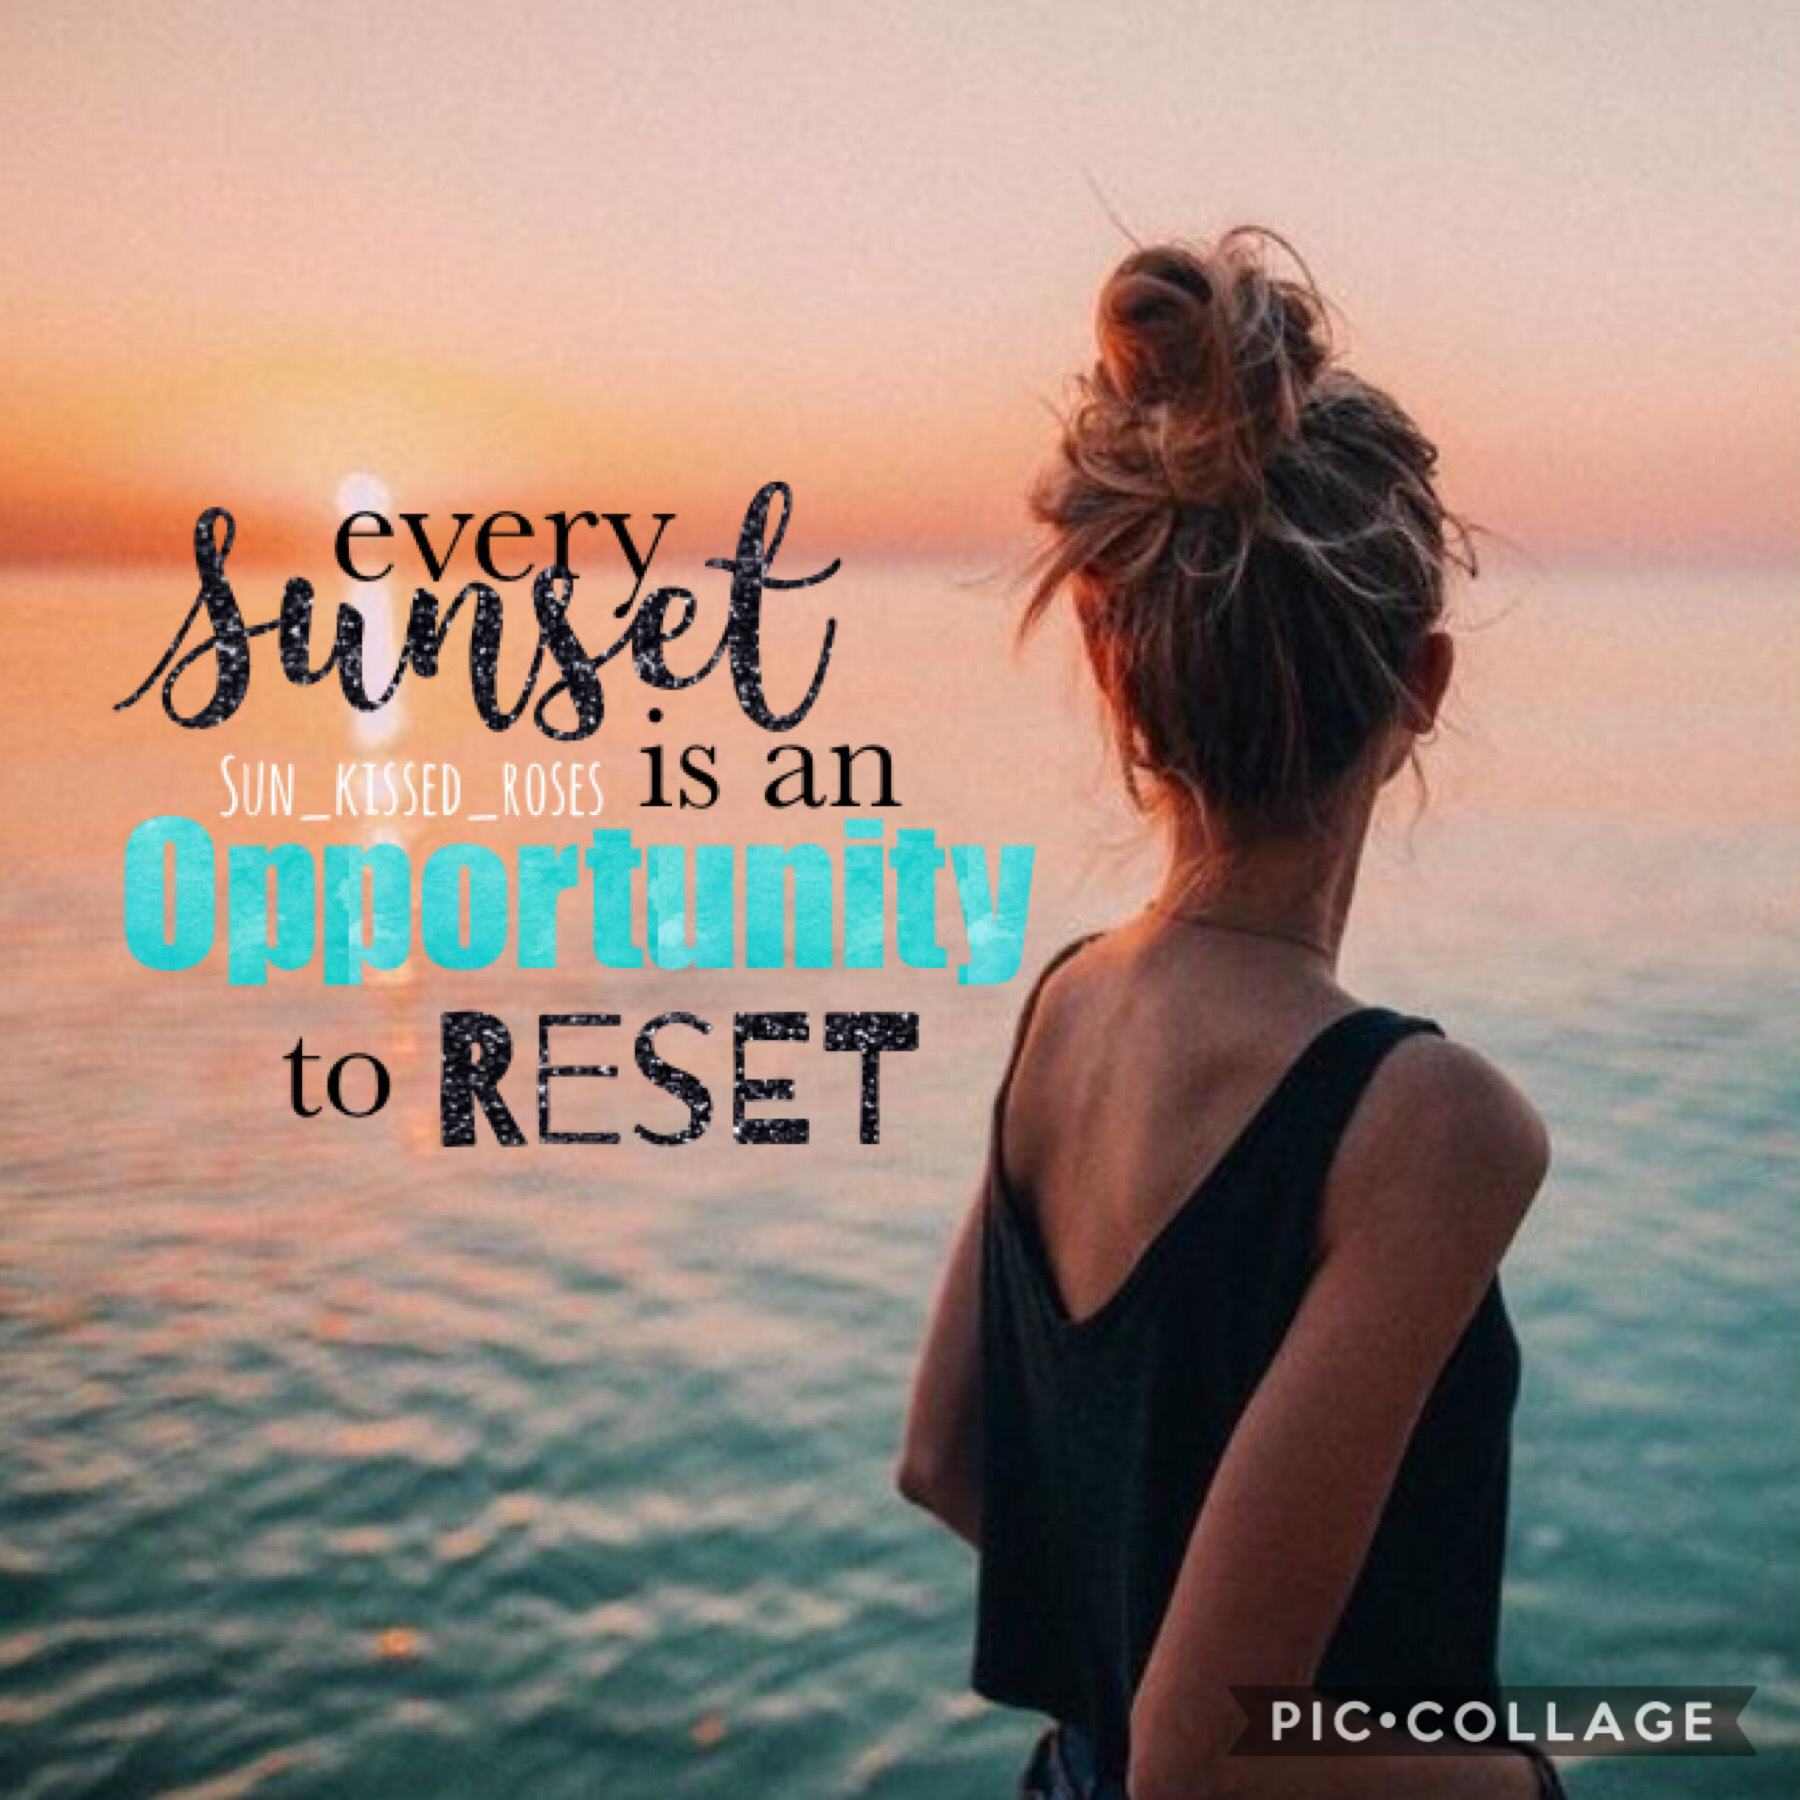 Every sunset is an opportunity to reset🌄